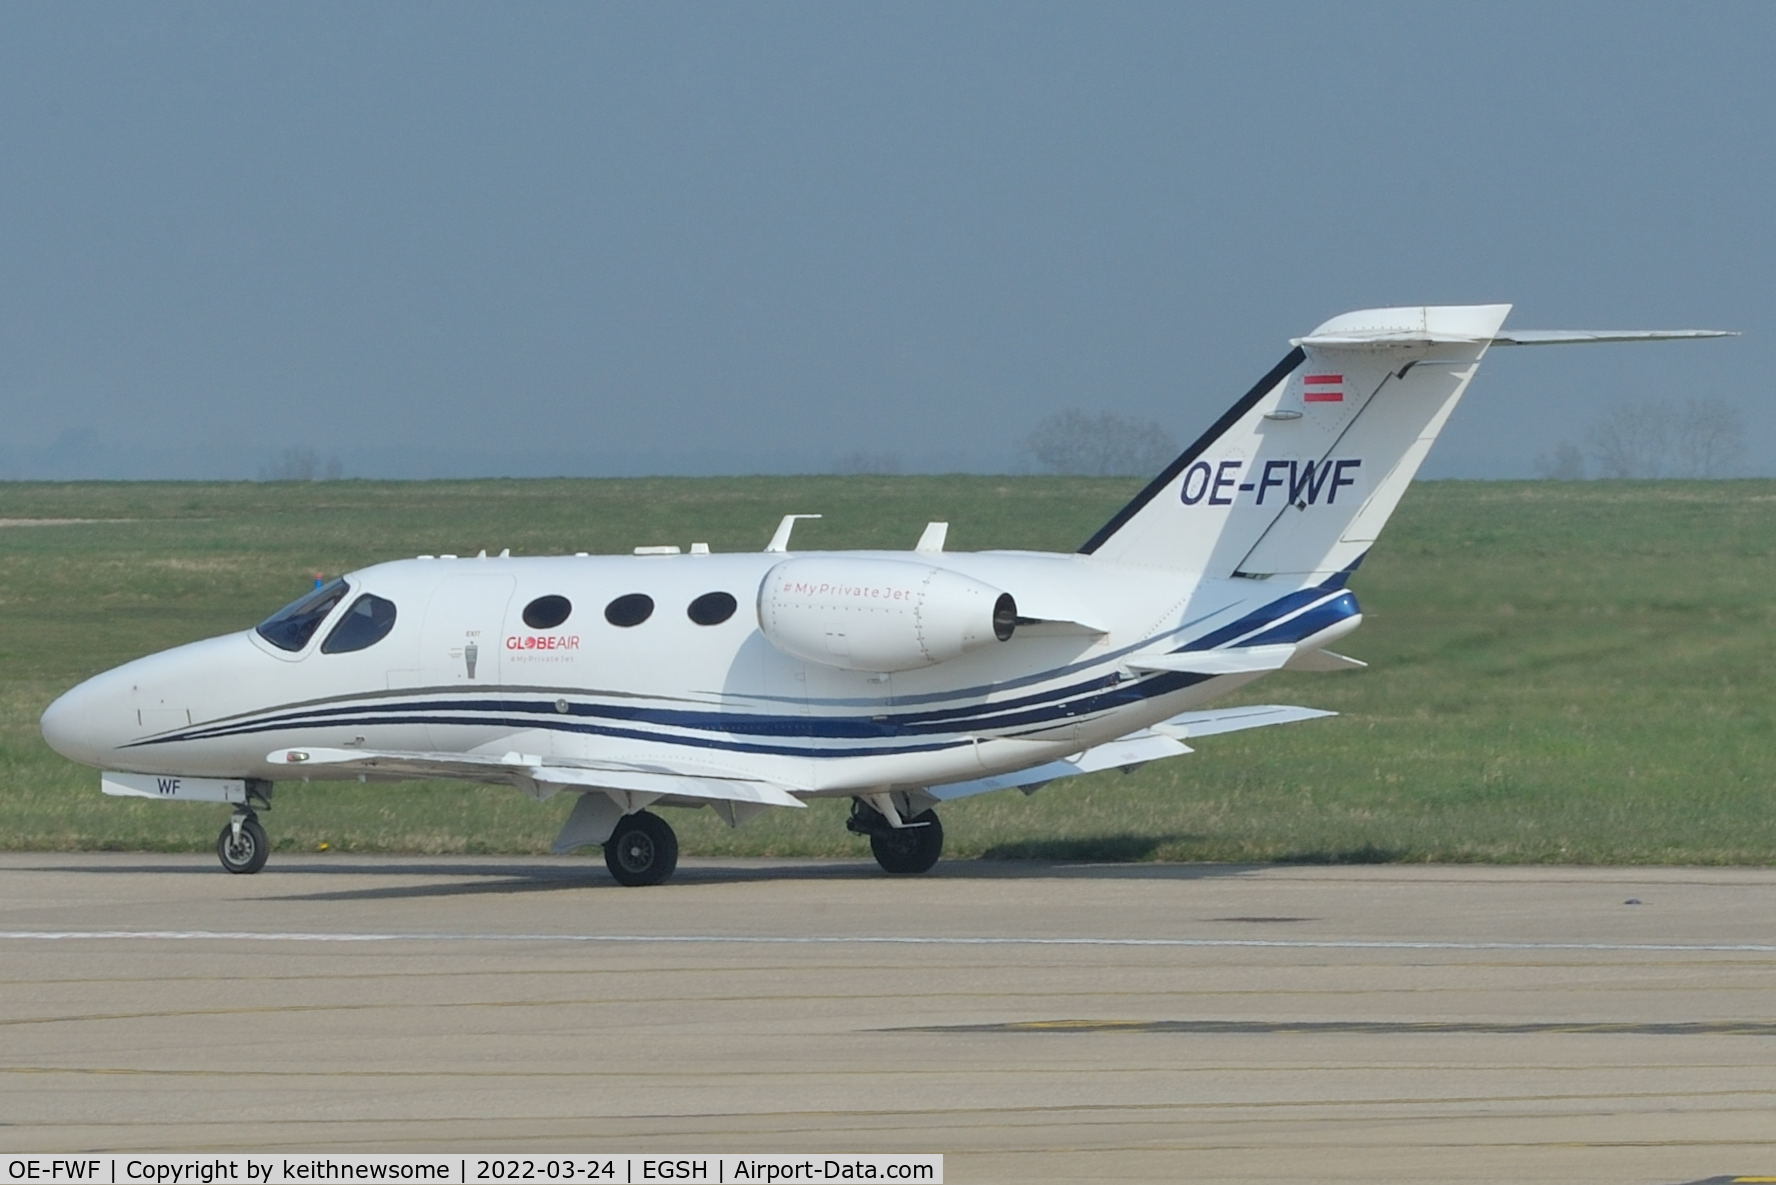 OE-FWF, 2007 Cessna 510 Citation Mustang Citation Mustang C/N 510-0048, Arriving at Norwich from Amsterdam.